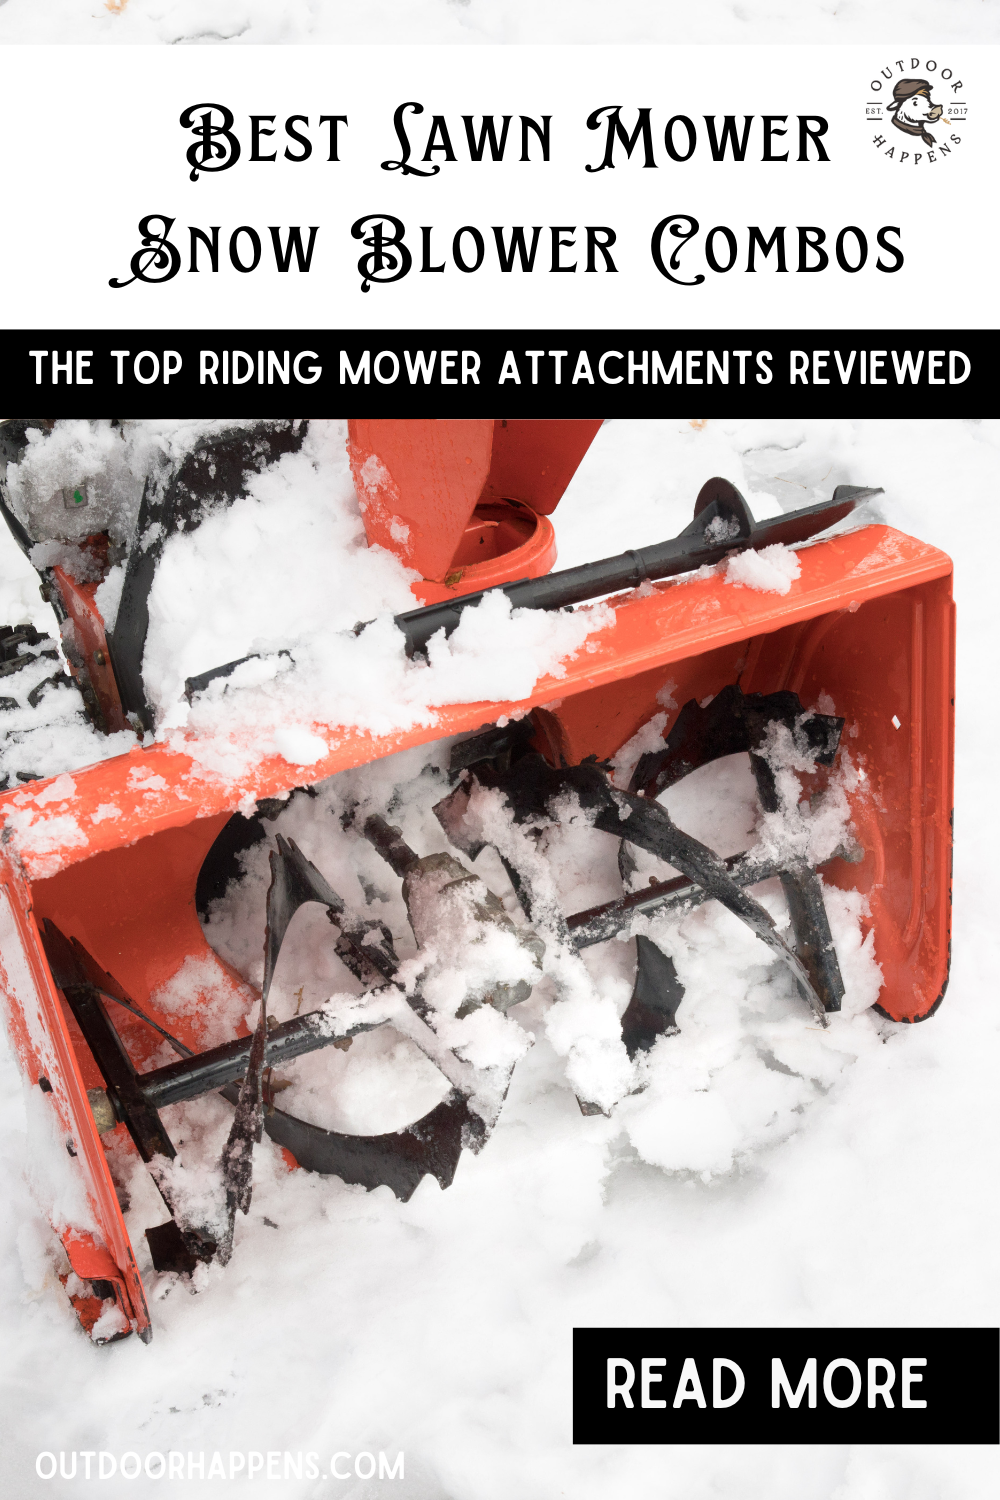 The Top Riding Mower Attachments Reviewed